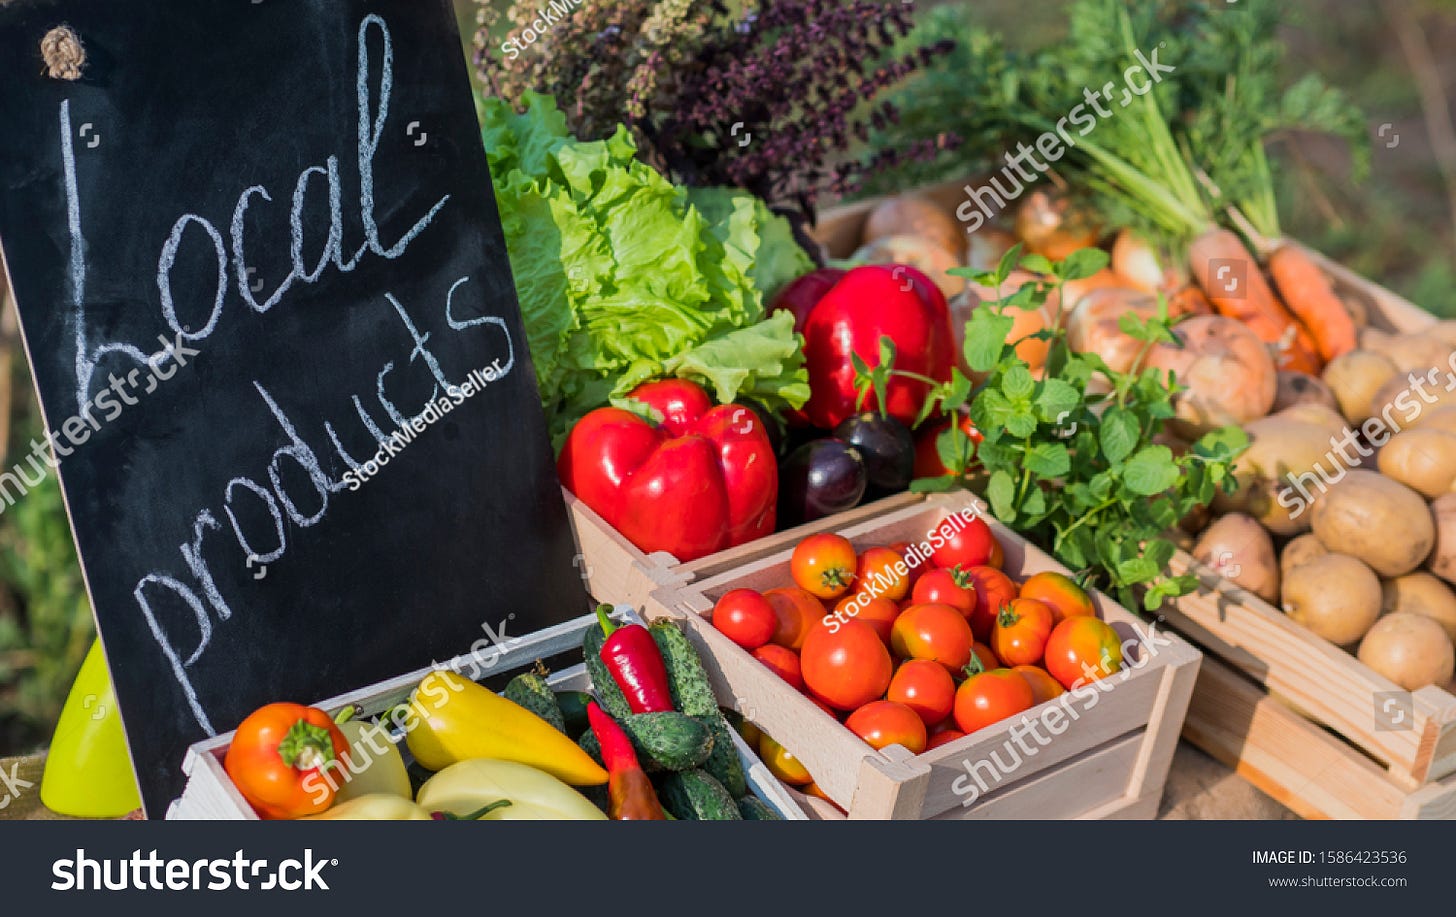 Counter with fresh vegetables and a sign of local products